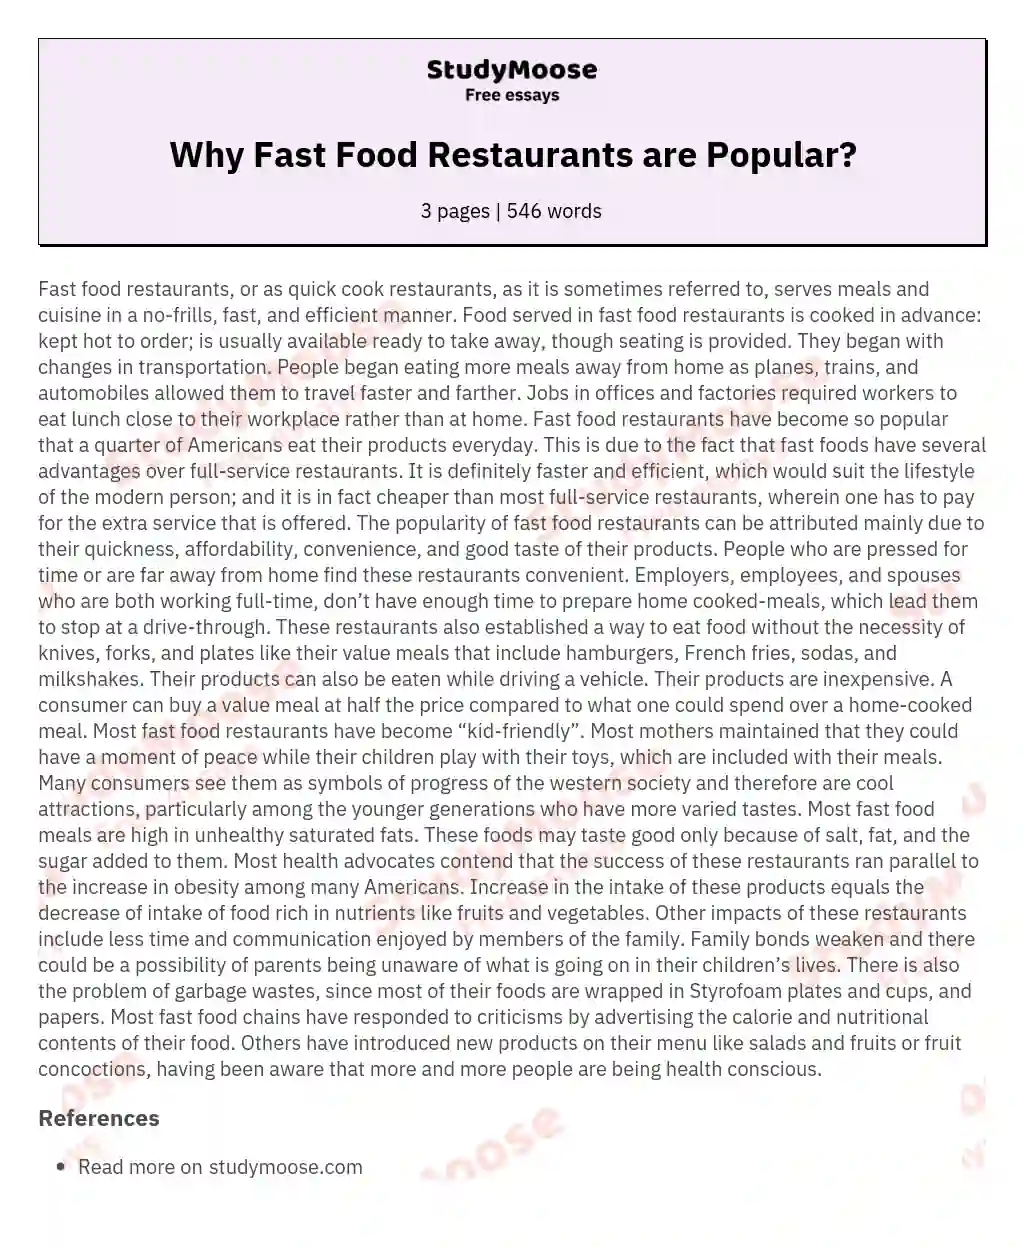 Why Fast Food Restaurants are Popular? essay